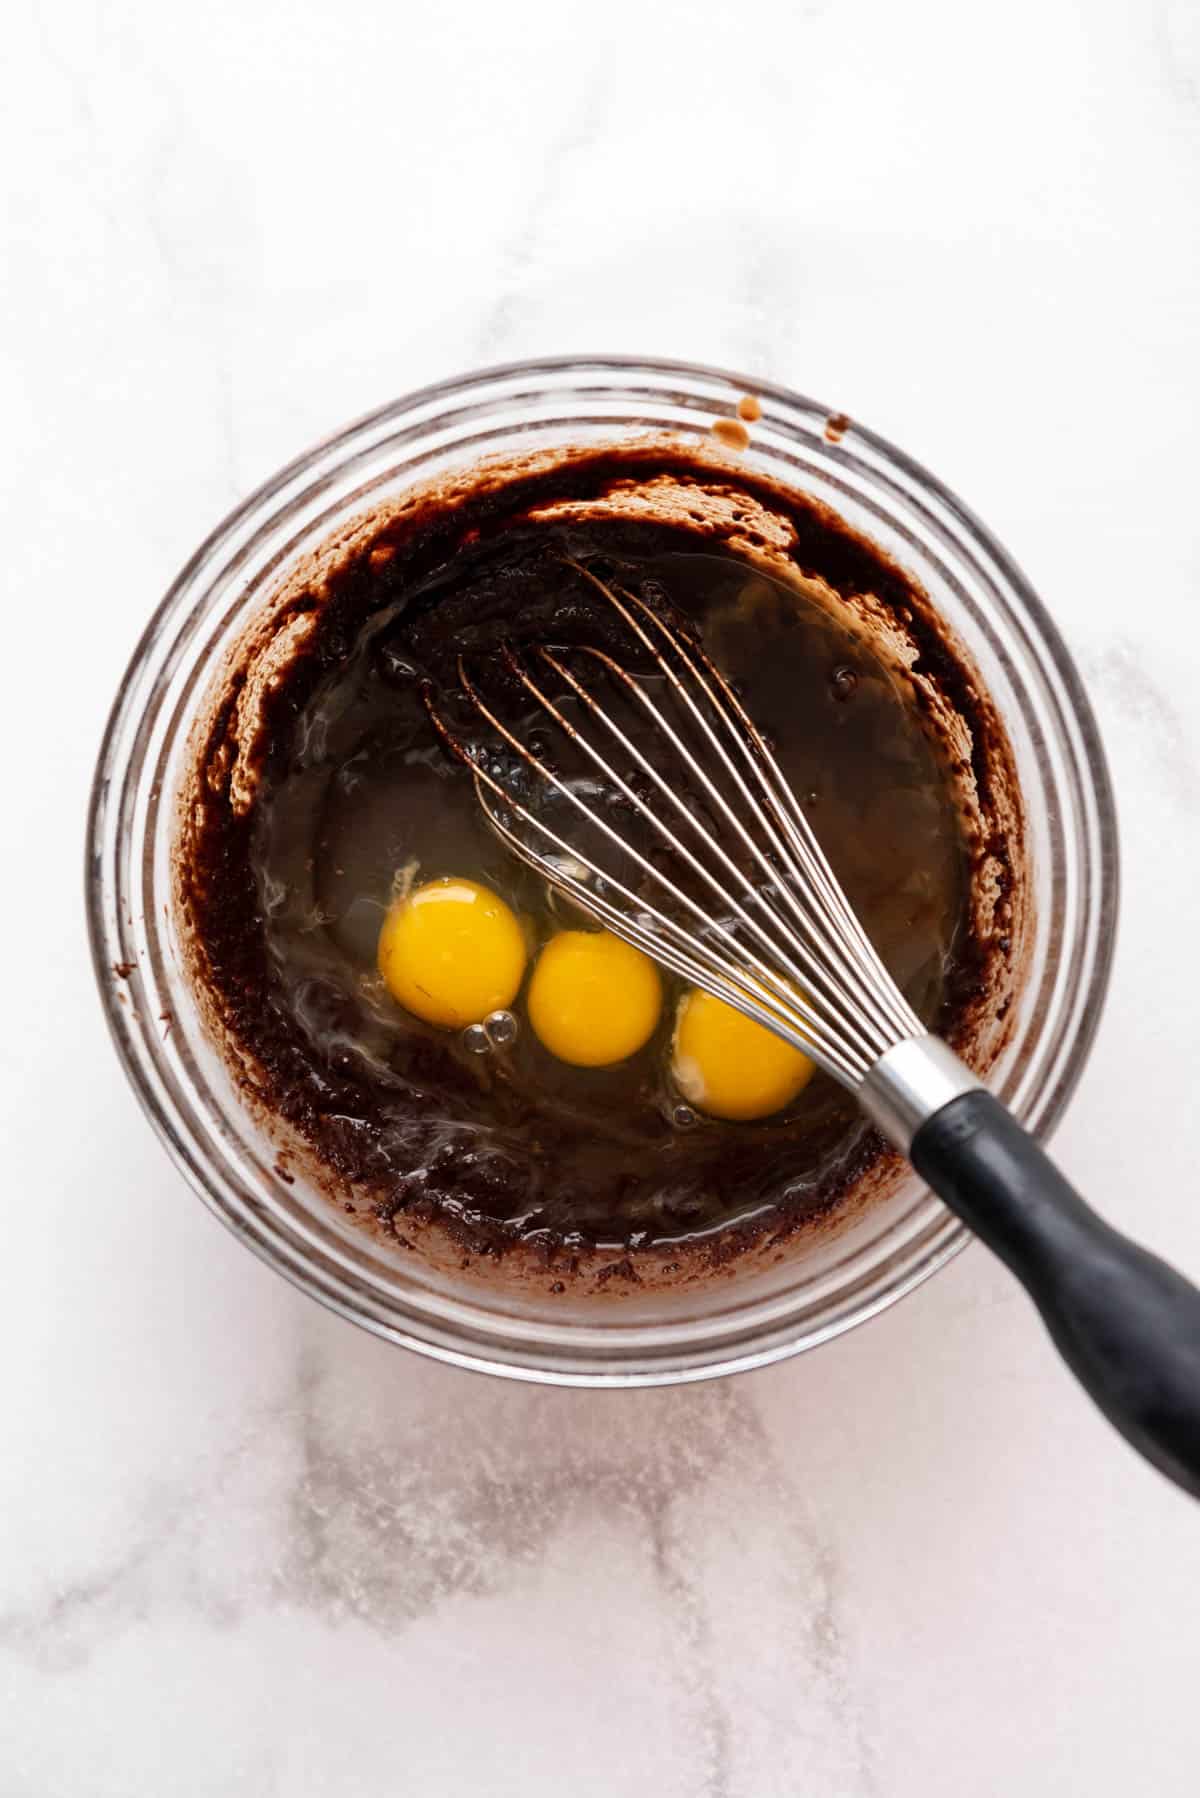 3 eggs in a bowl of brownie batter with a whisk.